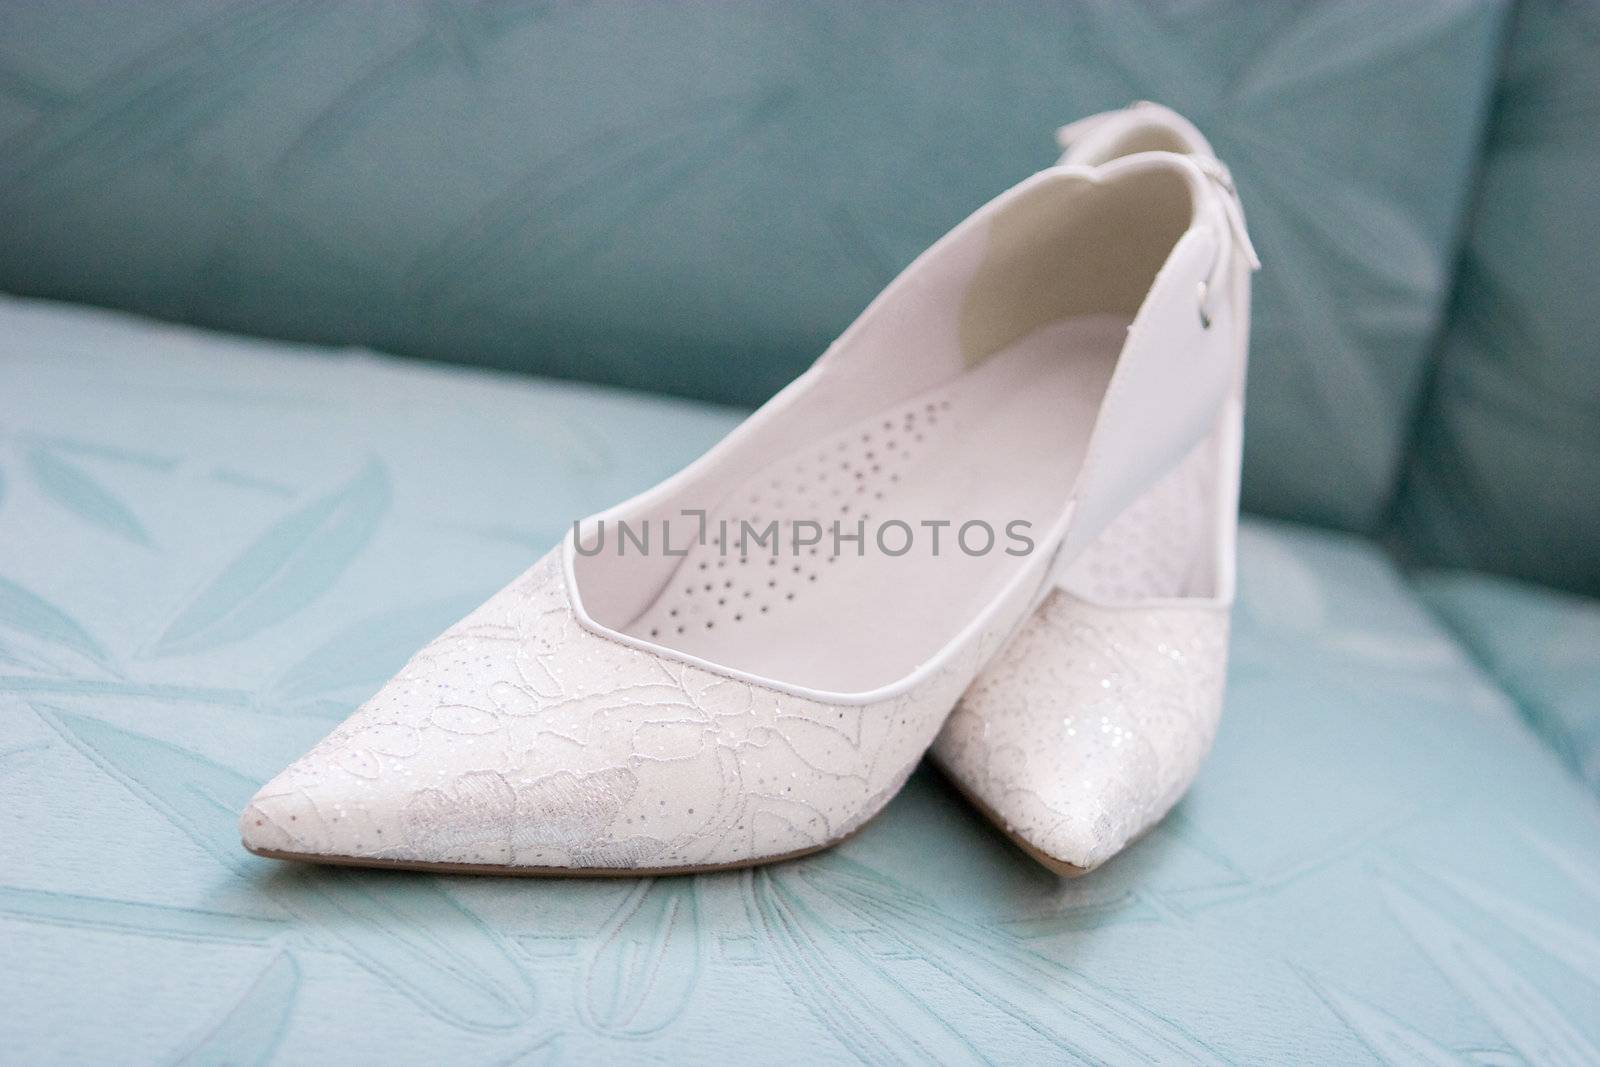 shoes of the bride